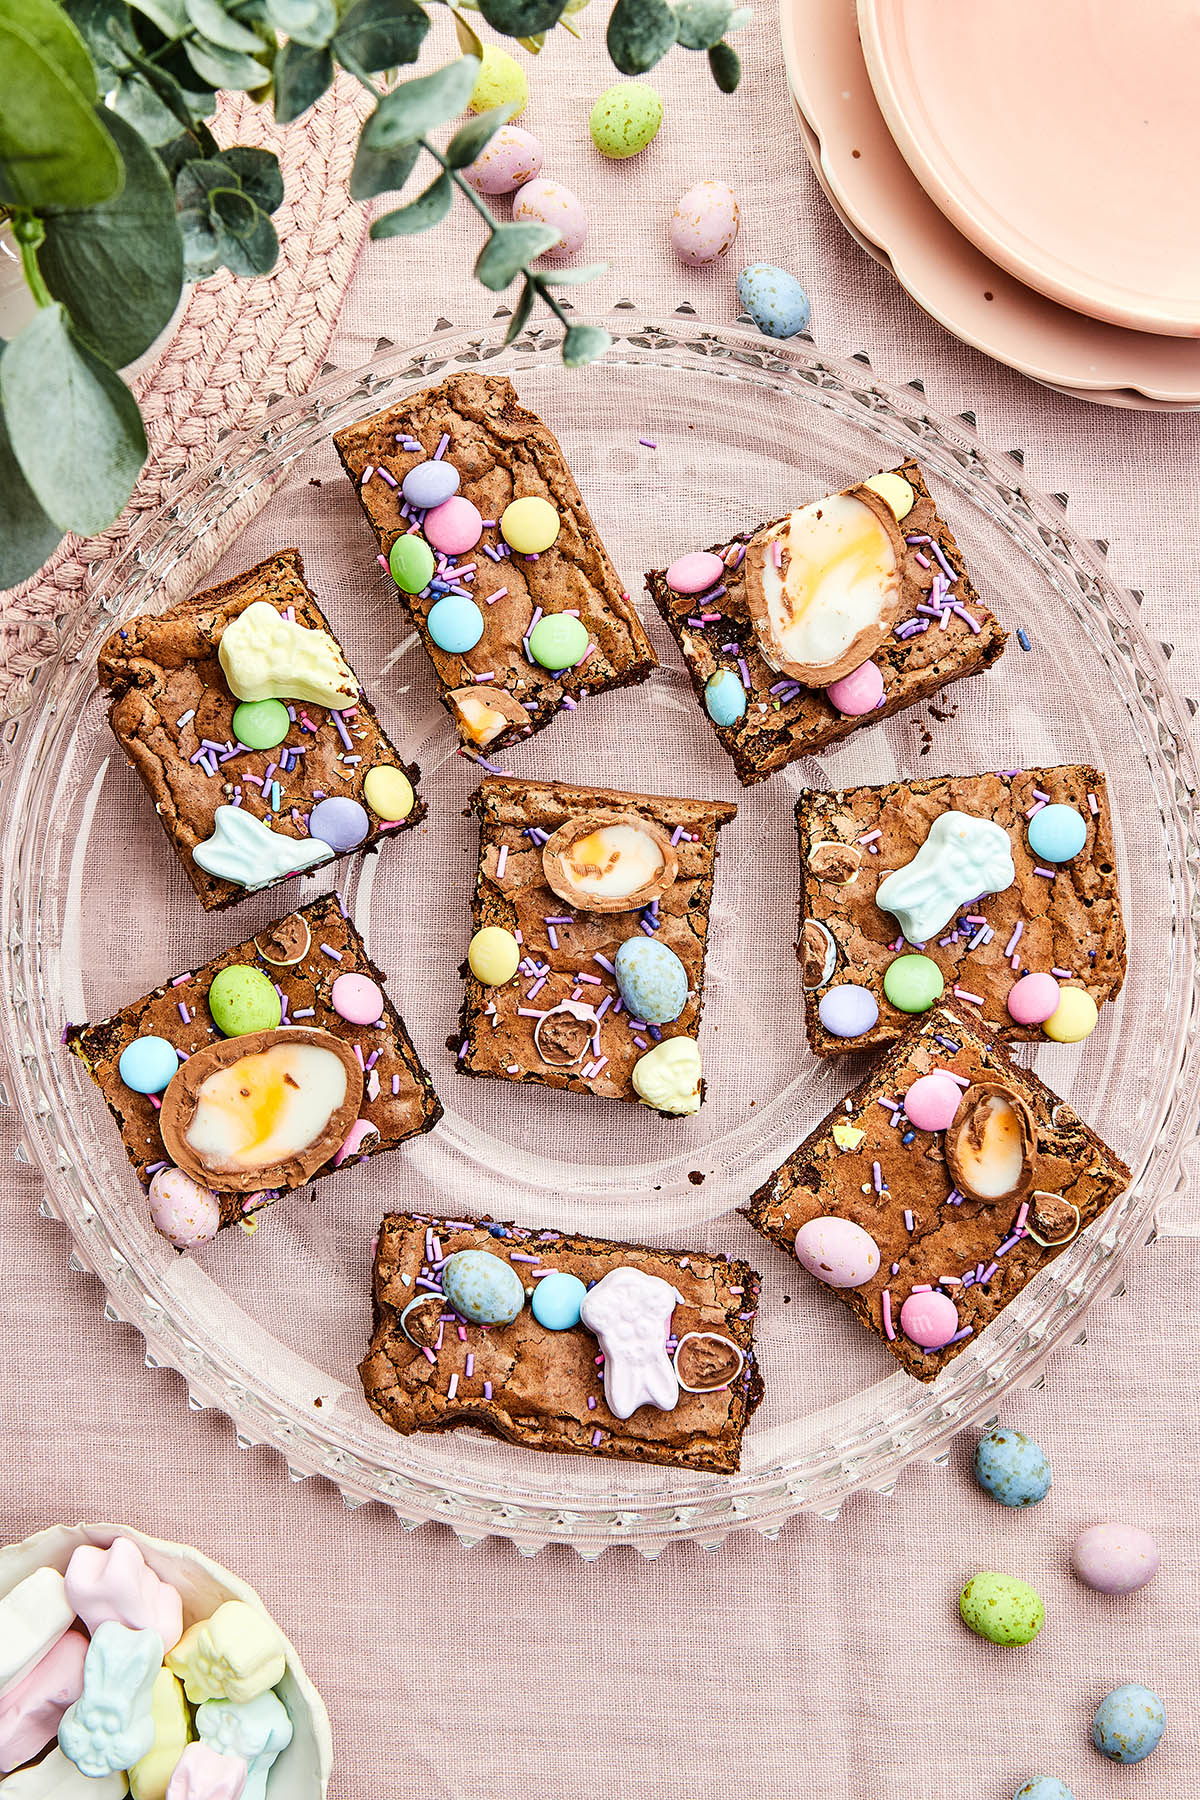 Easter brownies on a glass platter with plates, a plant, and candied chocolate eggs around.